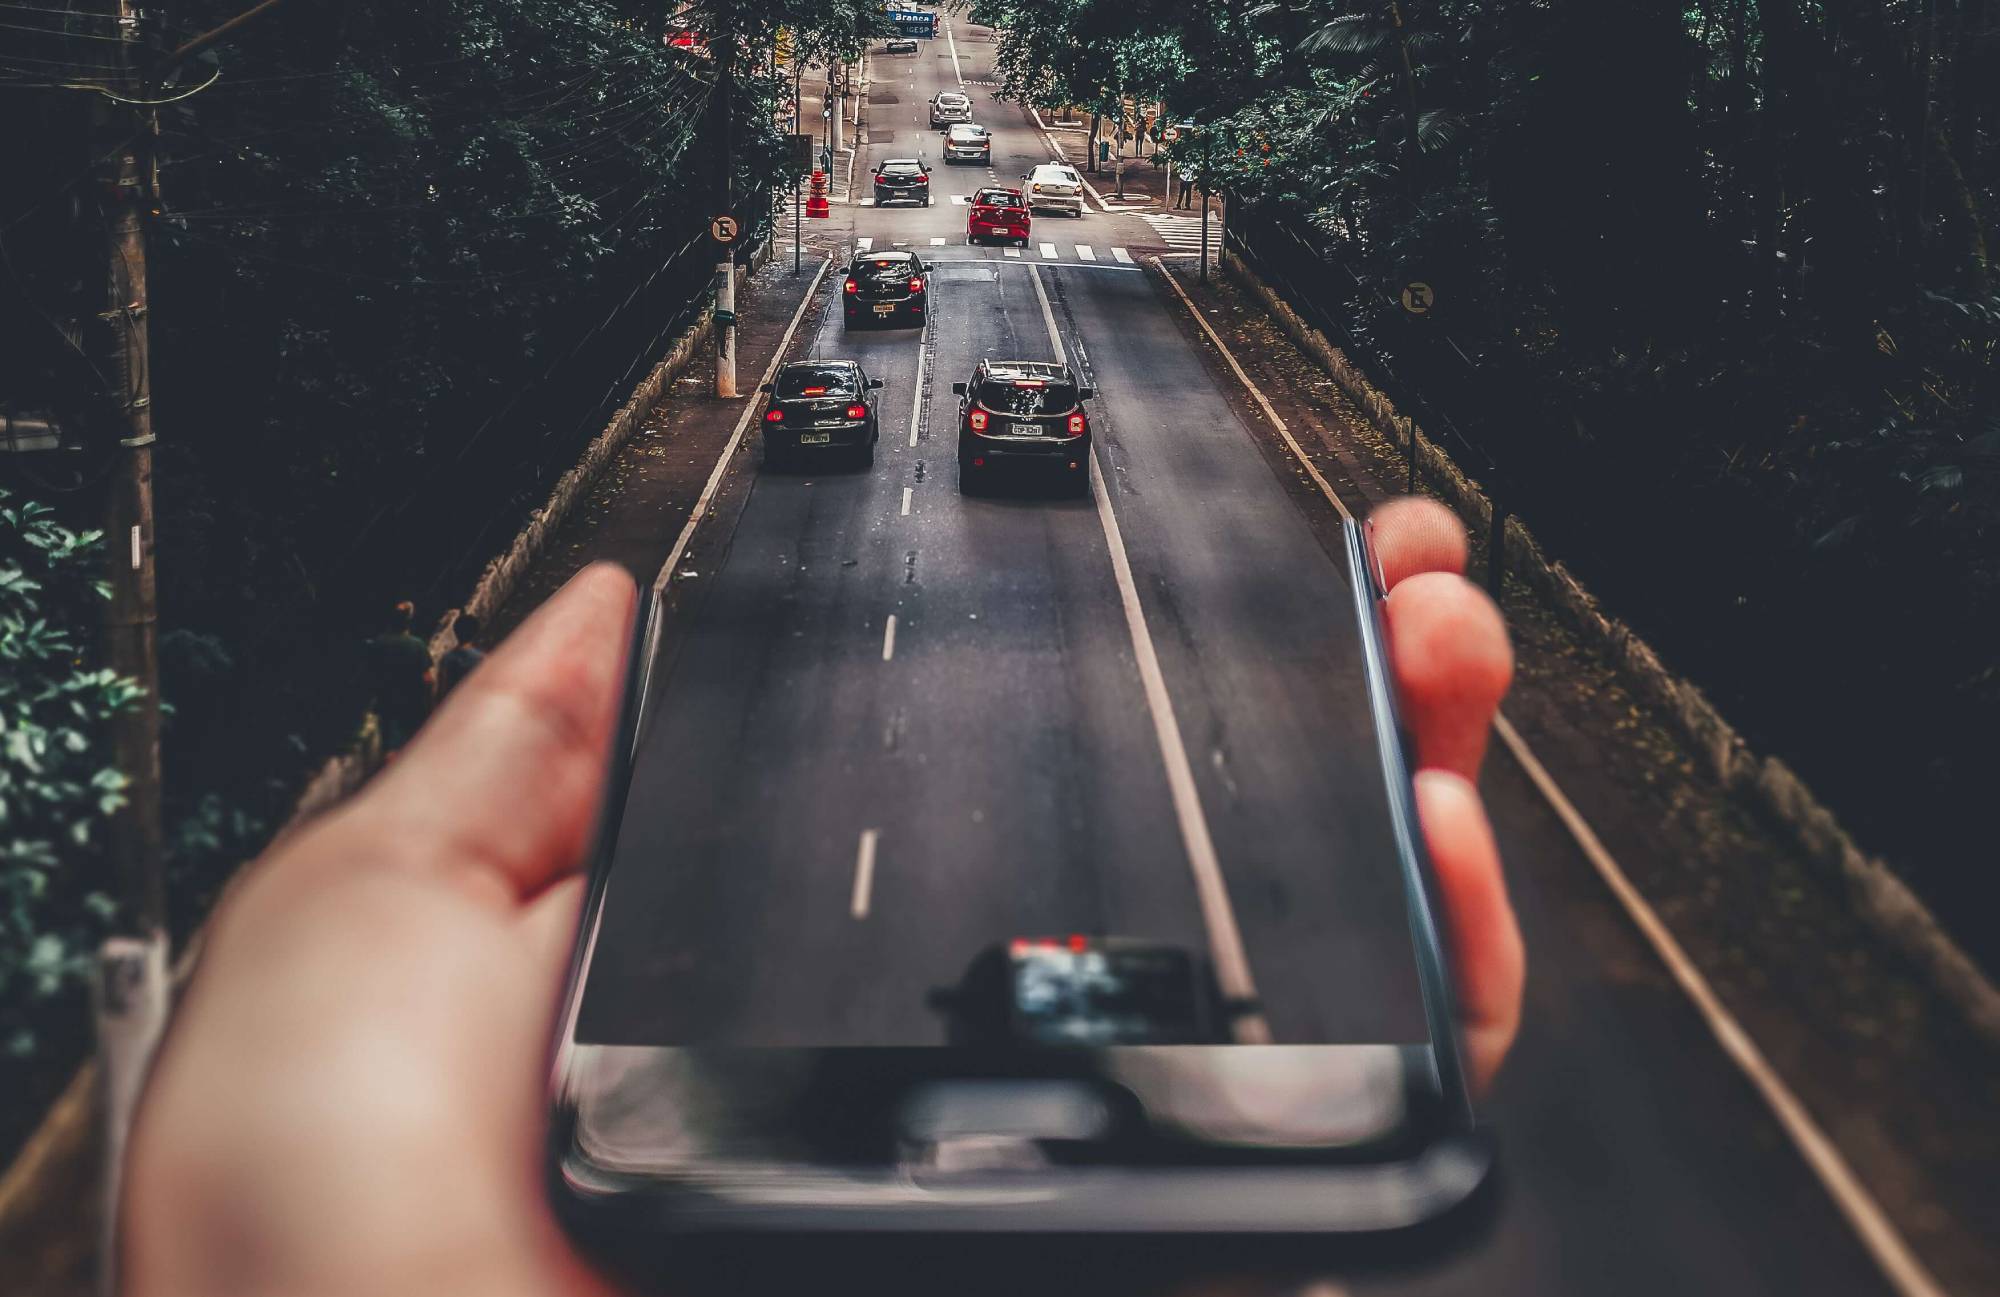 Several cars drive along a street, which blends into the screen of a mobile phone being held up by a white left hand. It gives the impression that the content of the phone and the real world have blended.